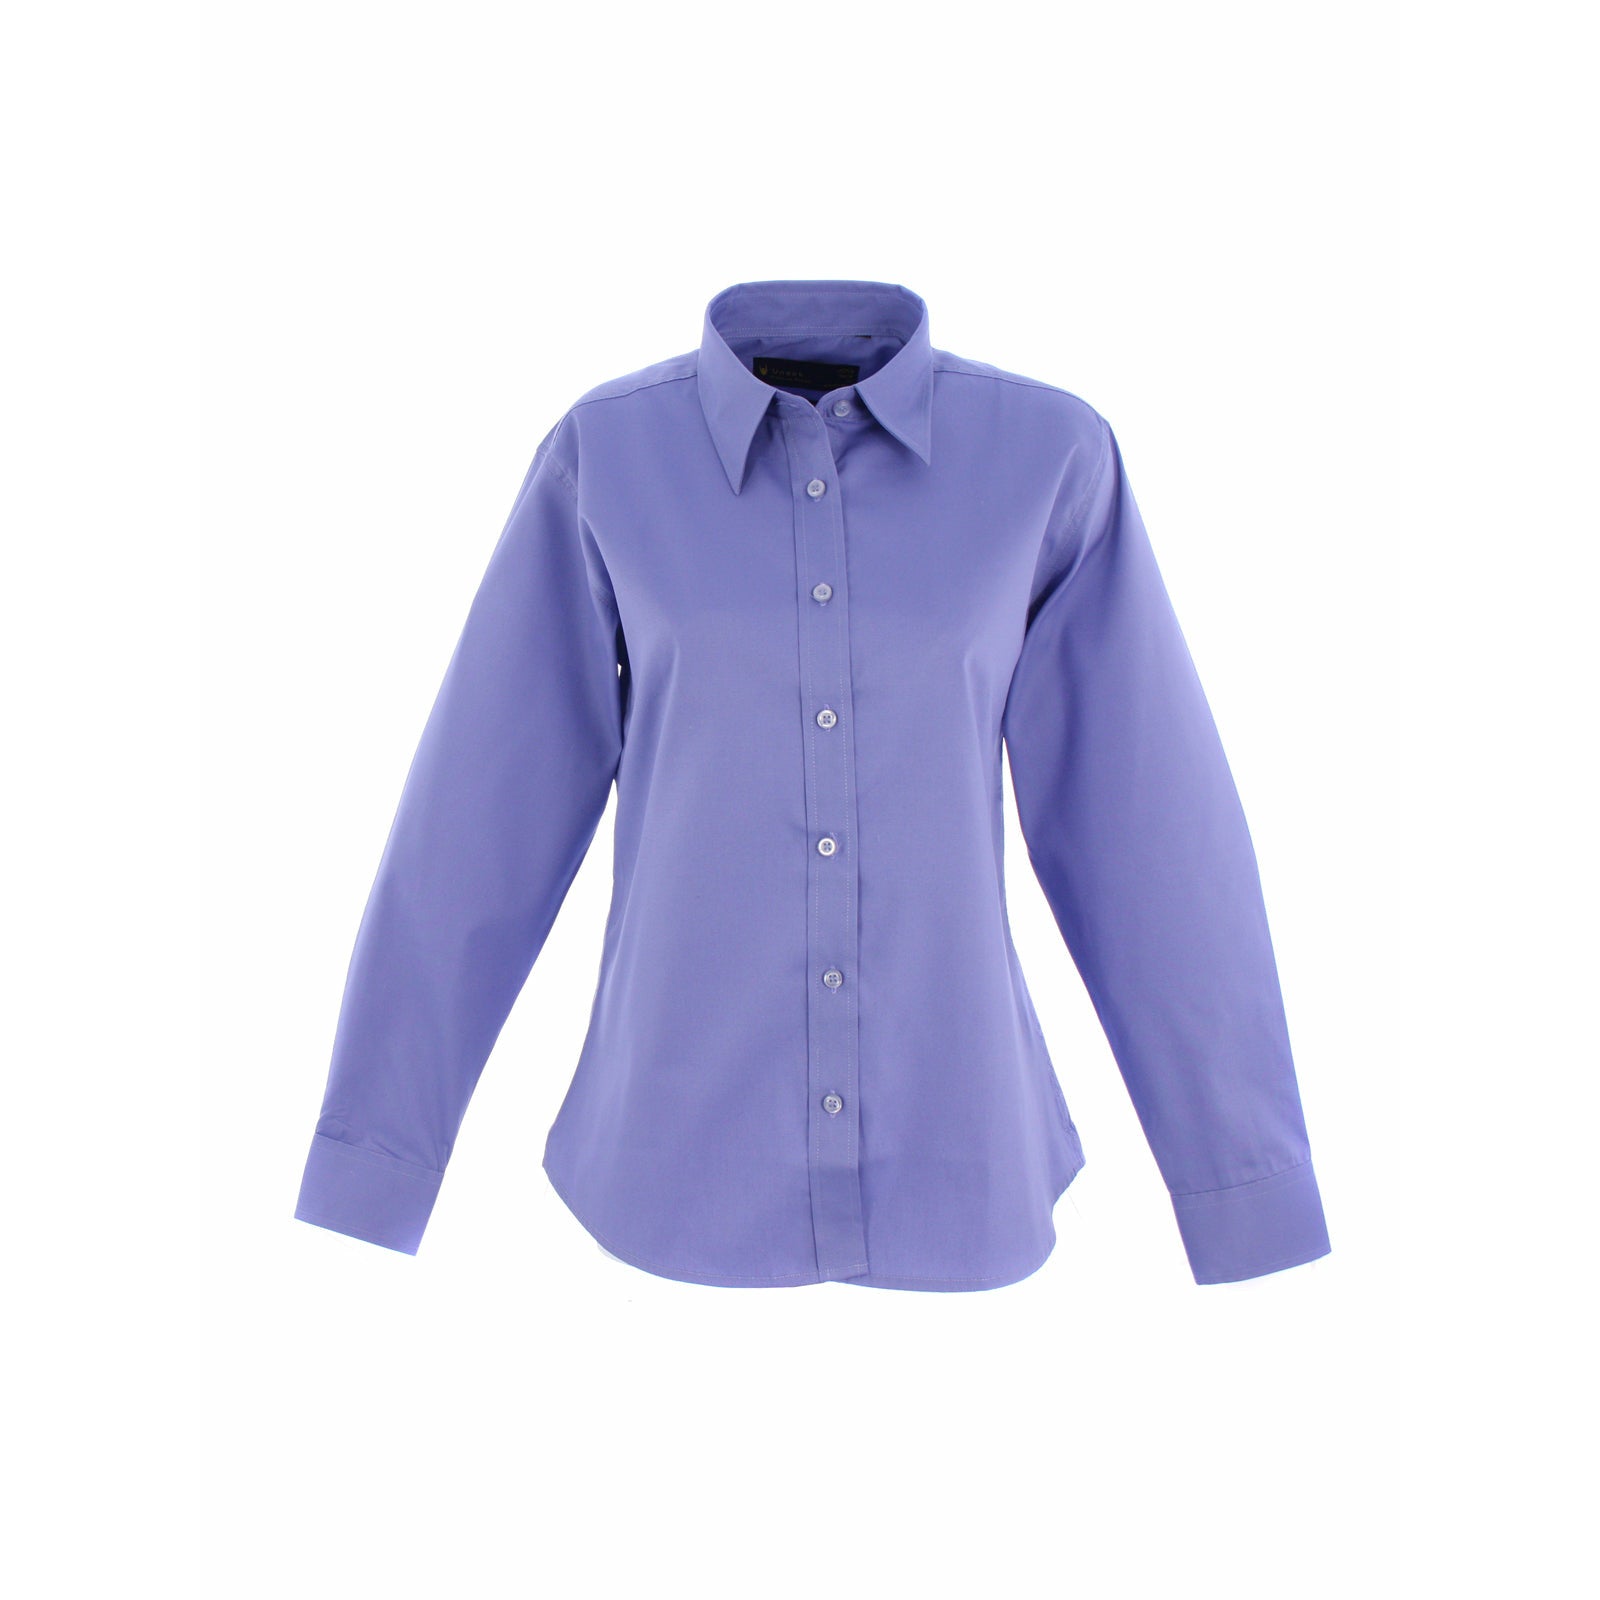 Ladies Pinpoint Oxford Full Sleeve Shirt - Mid Blue